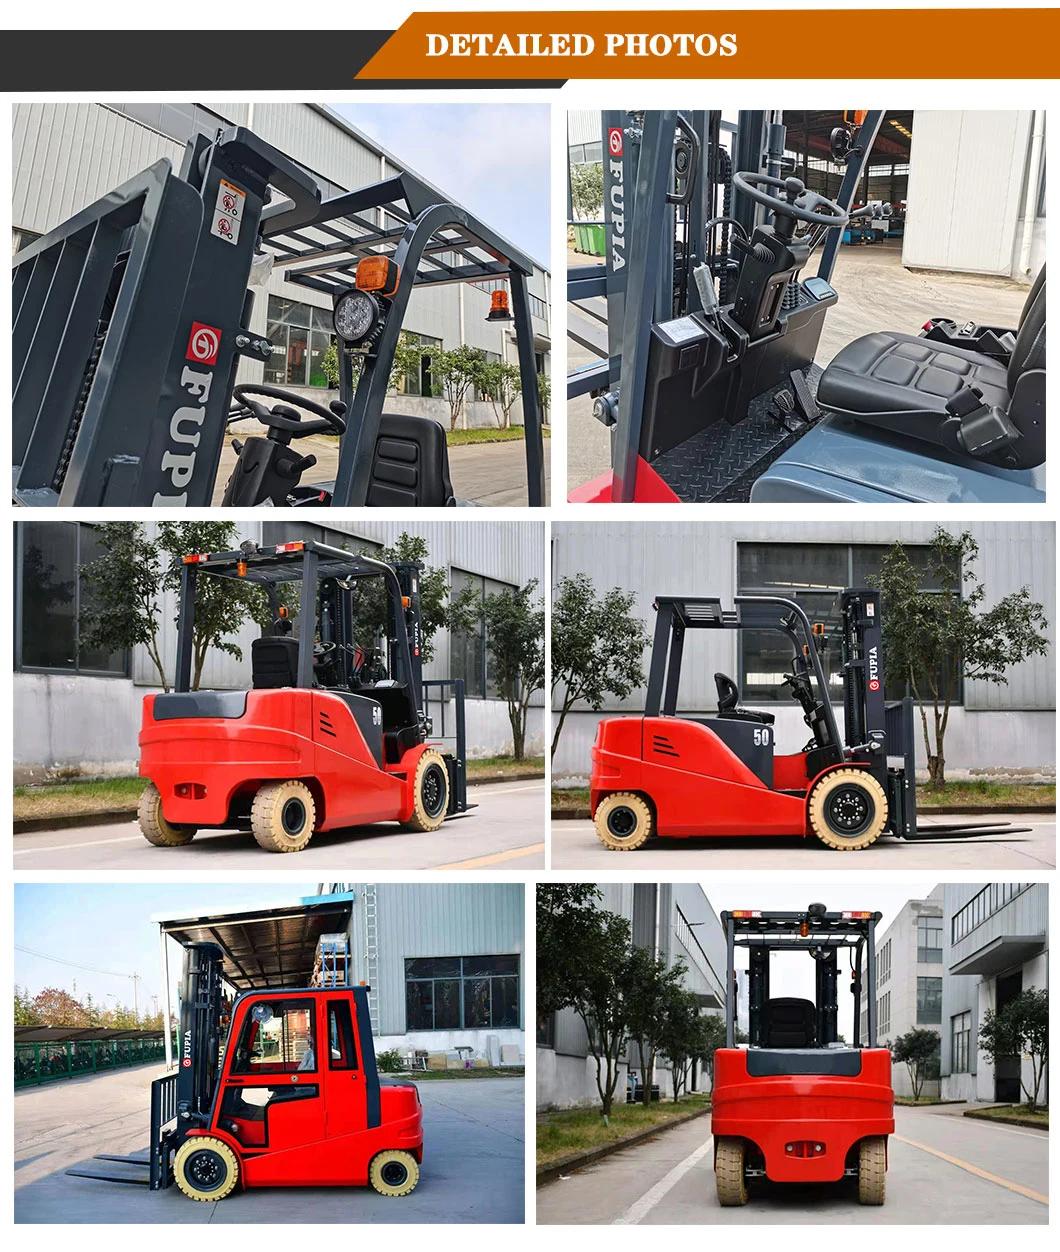 Material Handling Equipment Linde Forklift Technology 5000kg Capacity Battery Operated 4 Wheel Drive 5 Ton Electric Forklift Truck